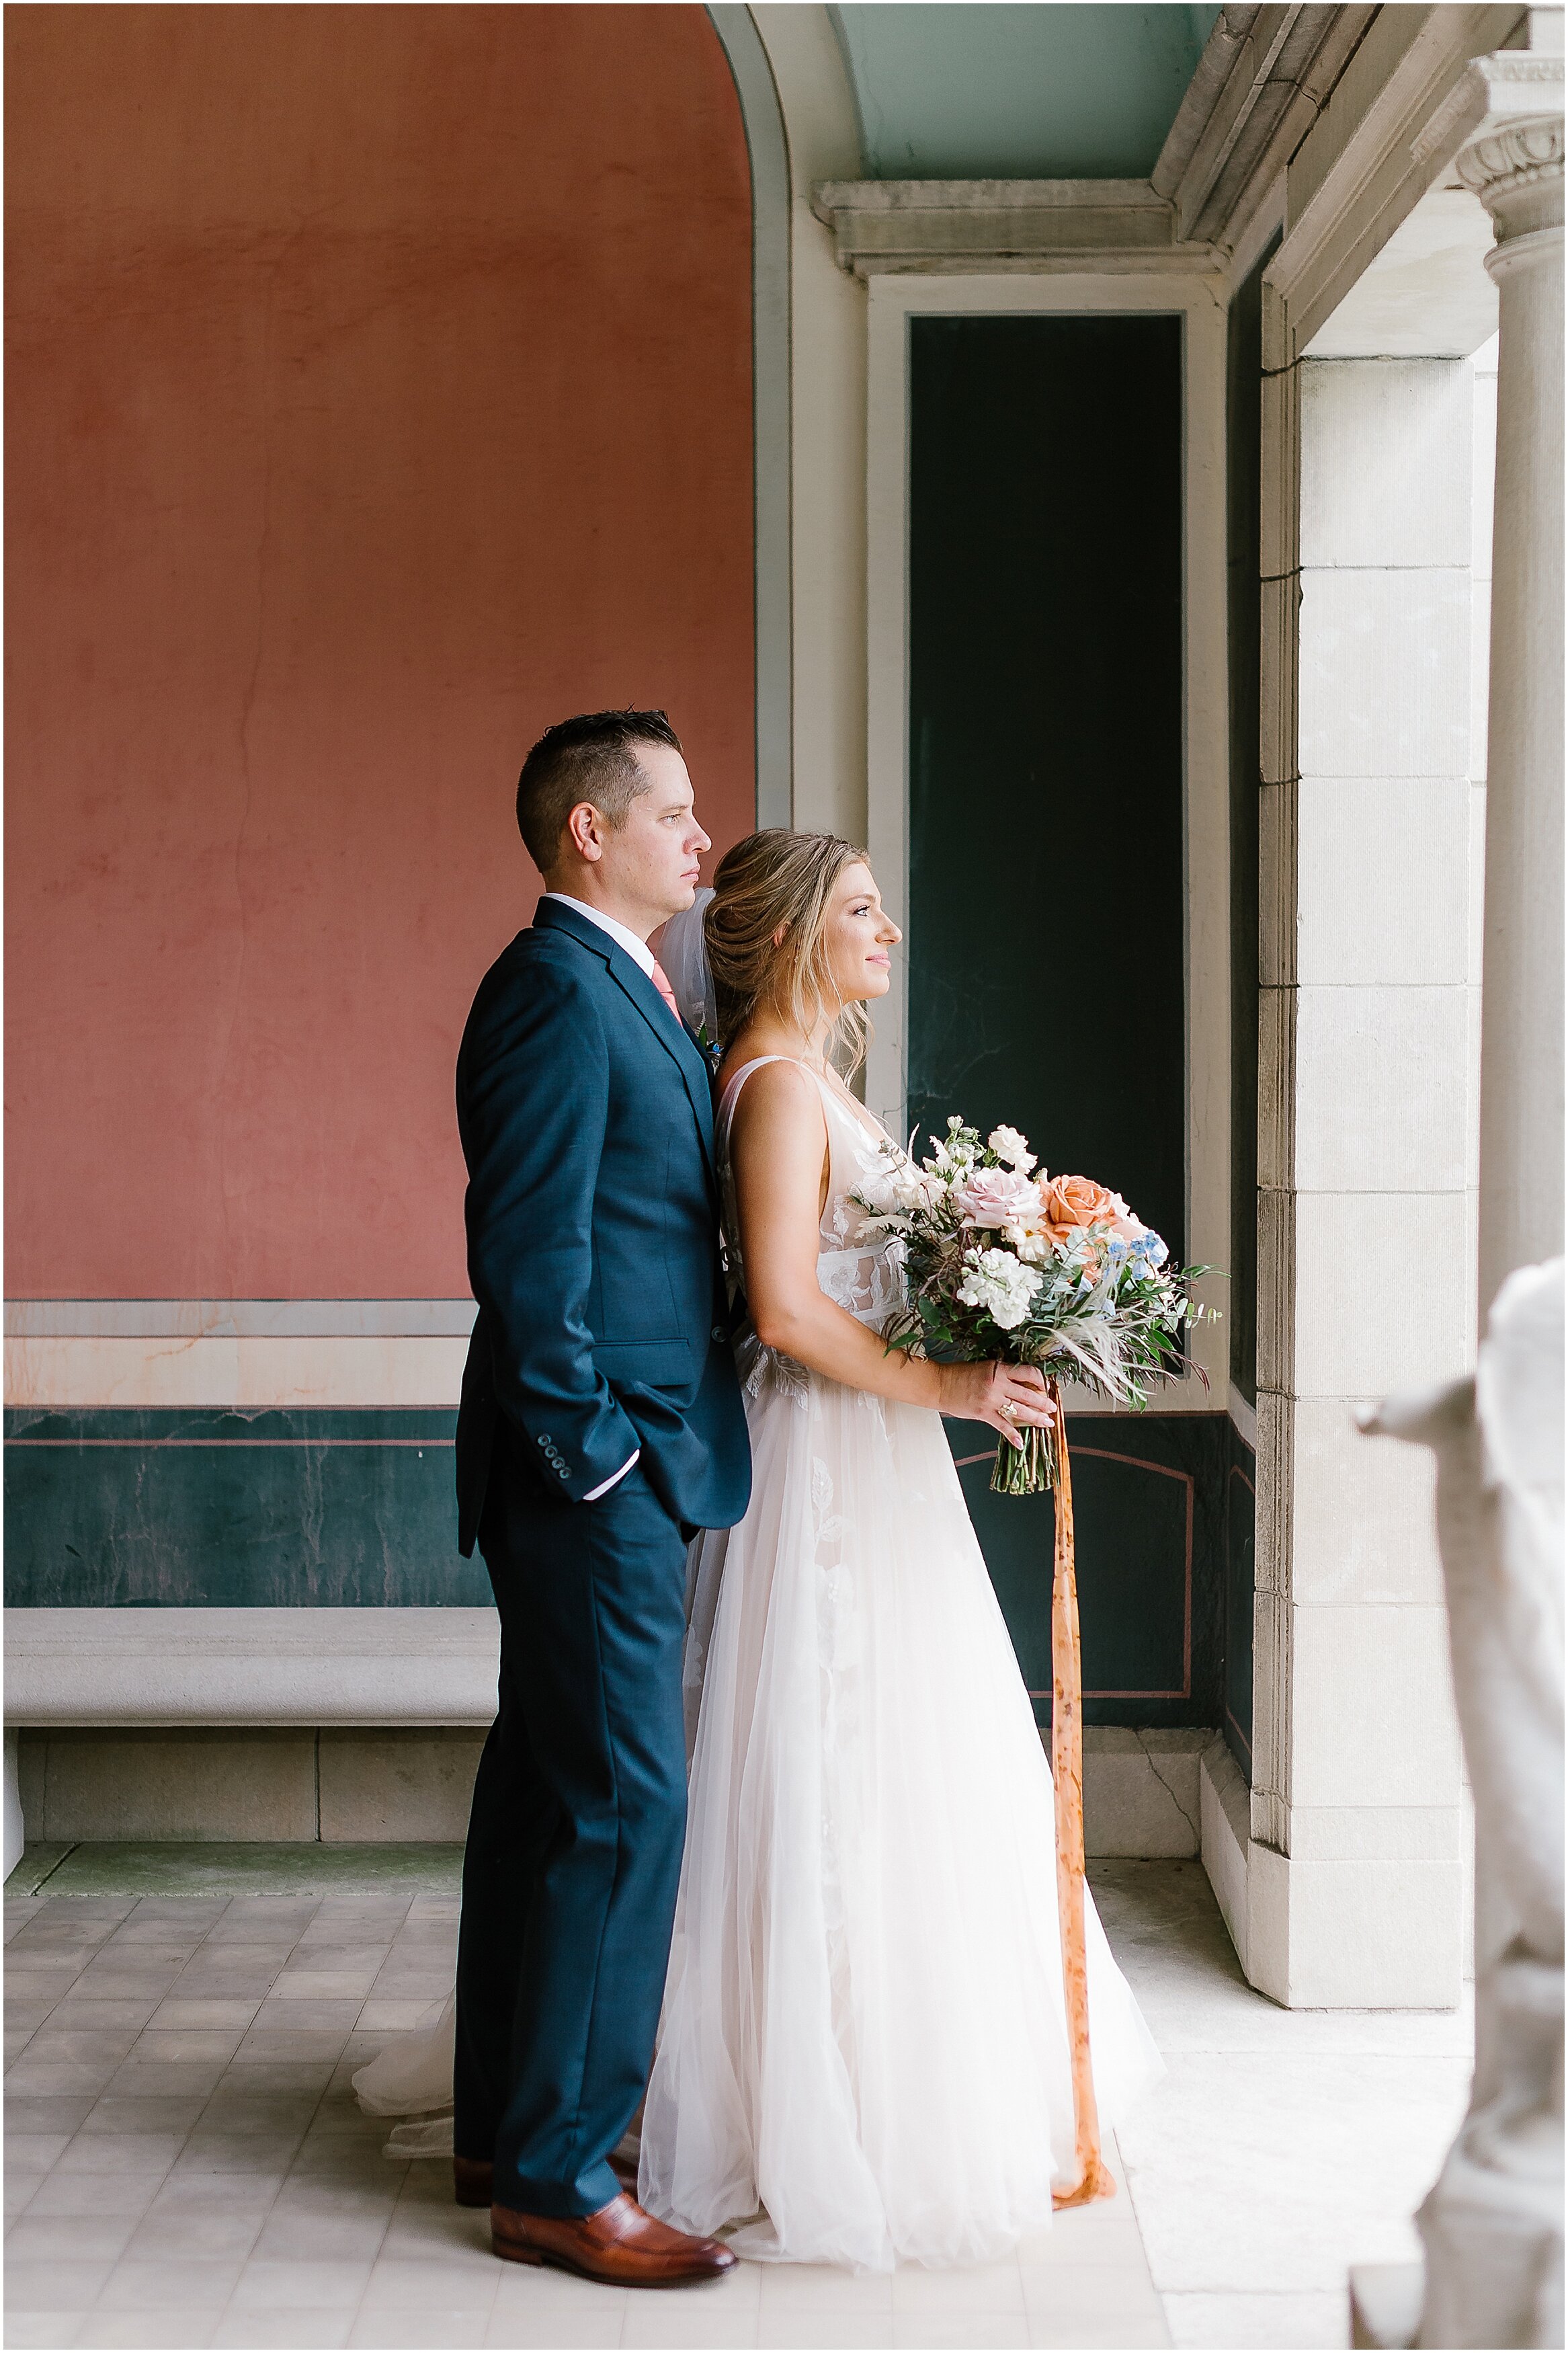 Rebecca Shehorn Photography Colleen and Kyle Inn at Irwin Gardens Wedding-395_The Commons Columbus Inn at Irwin Garden Indianapolis Wedding Photographer.jpg